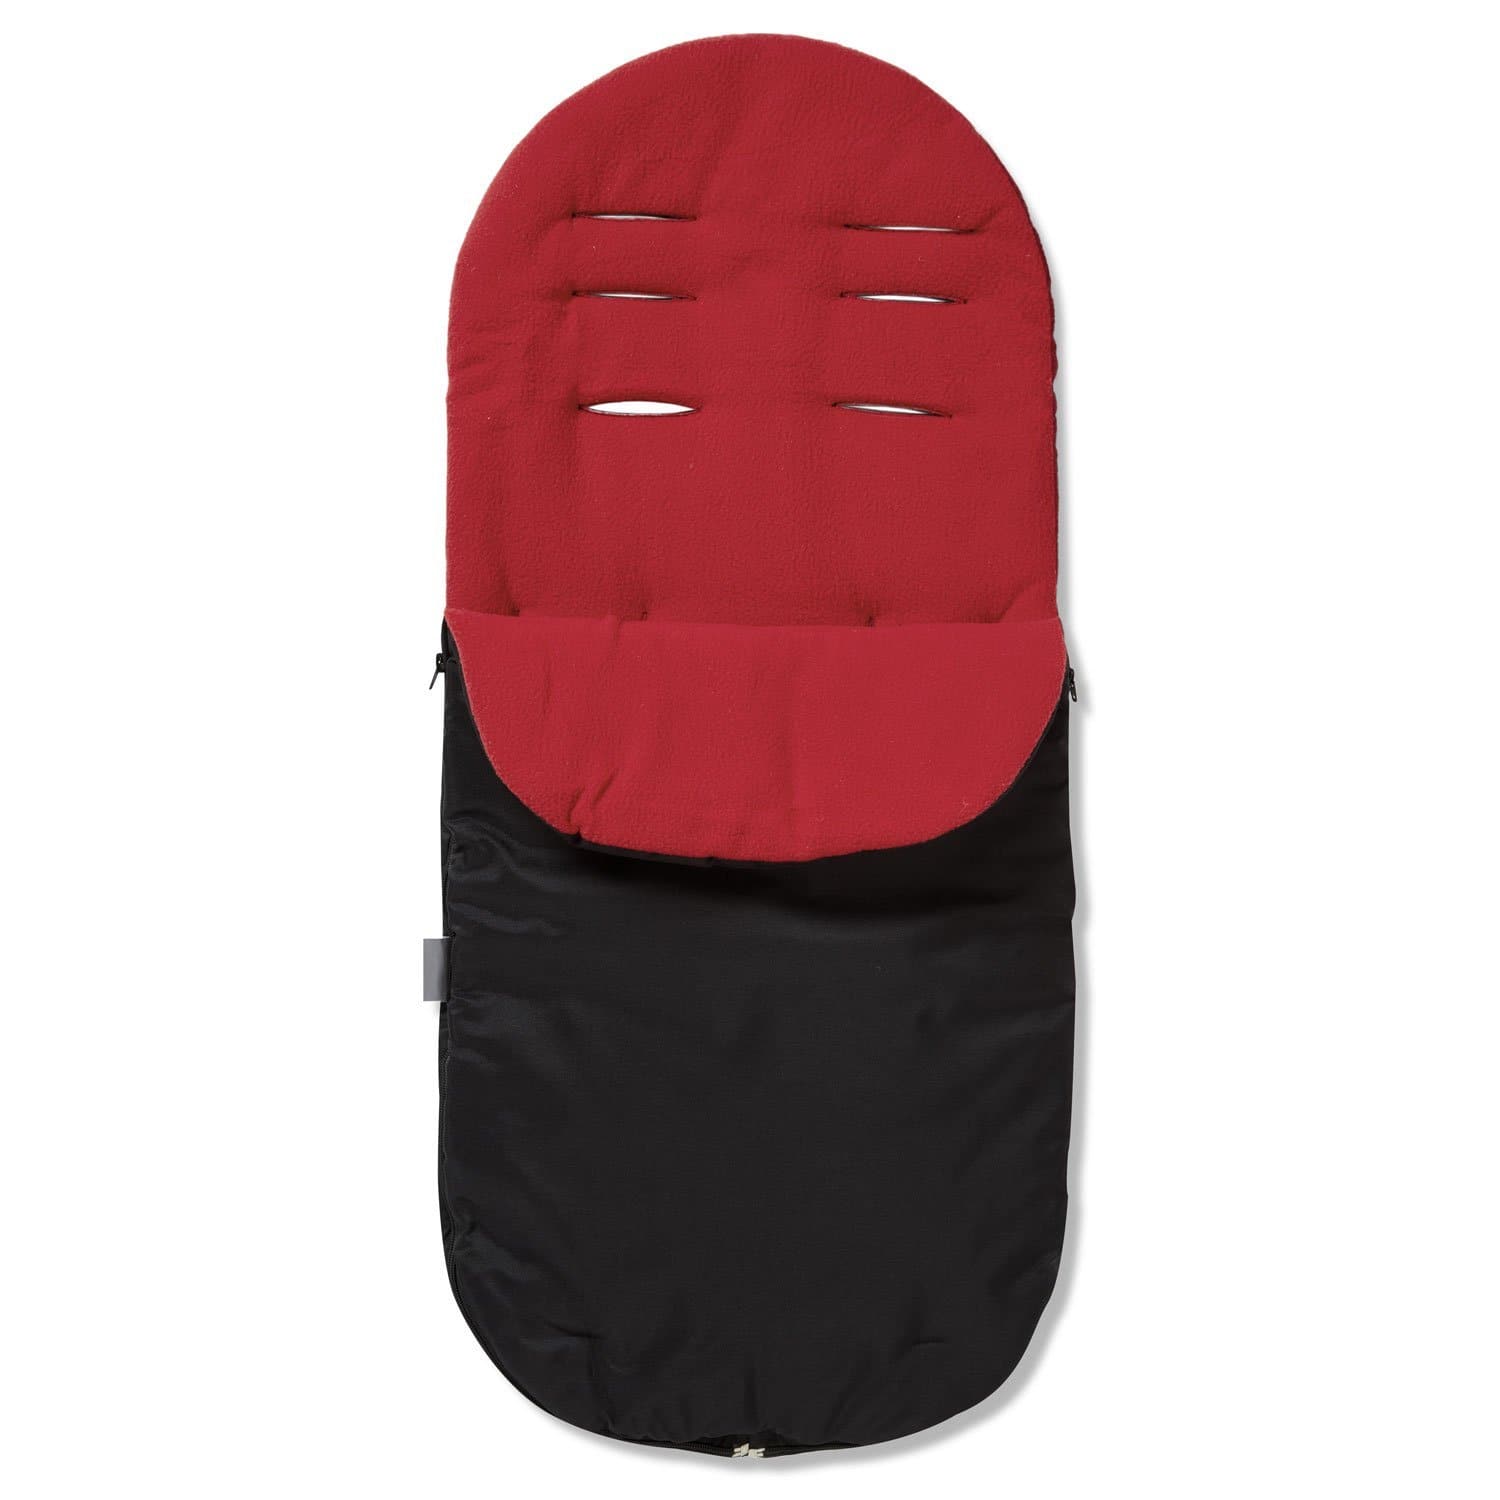 Footmuff / Cosy Toes Compatible with Urban Detour - Red / Fits All Models | For Your Little One